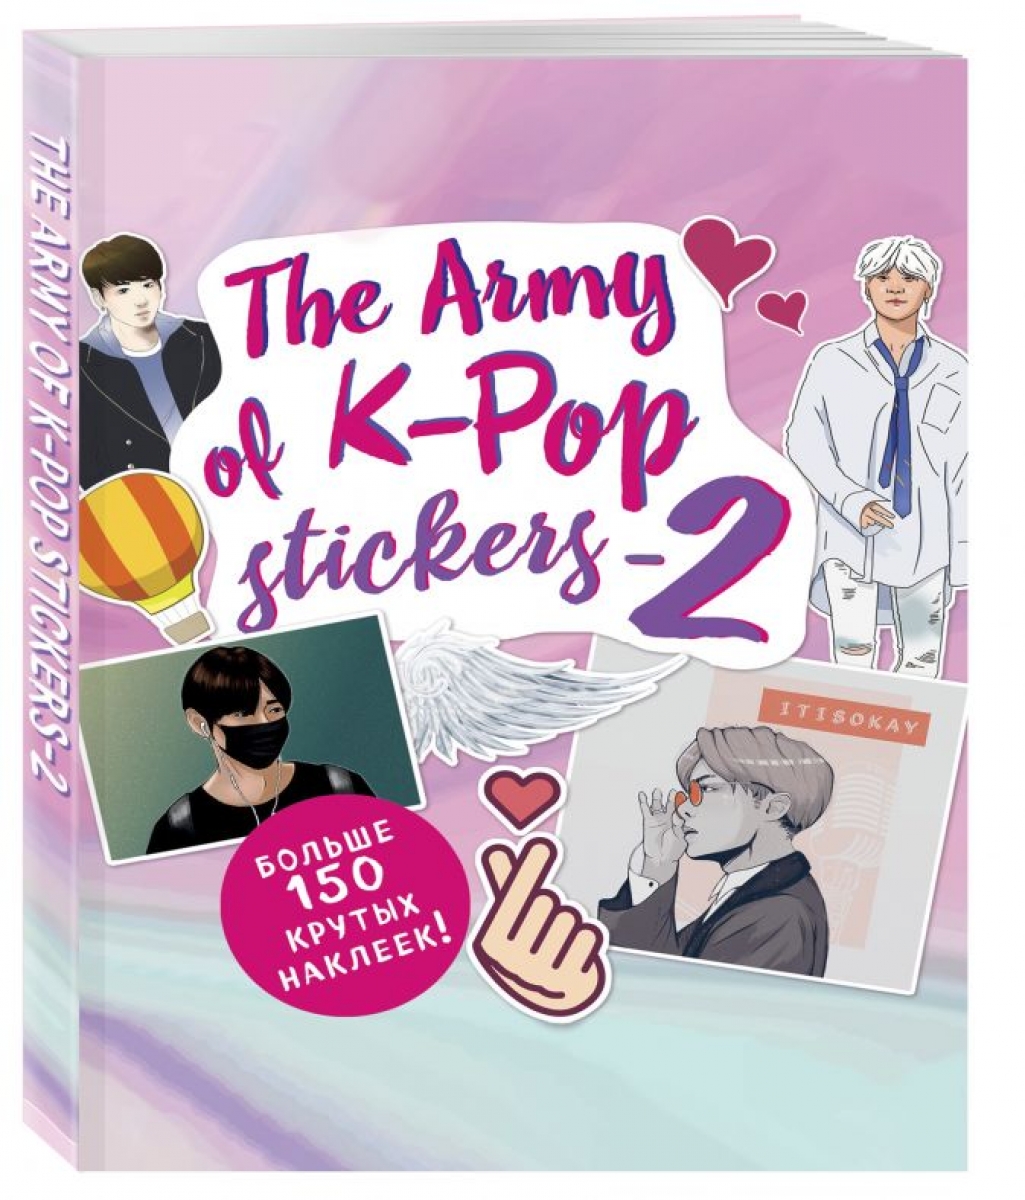 The ARMY of K-POP stickers - 2.  150  ! 